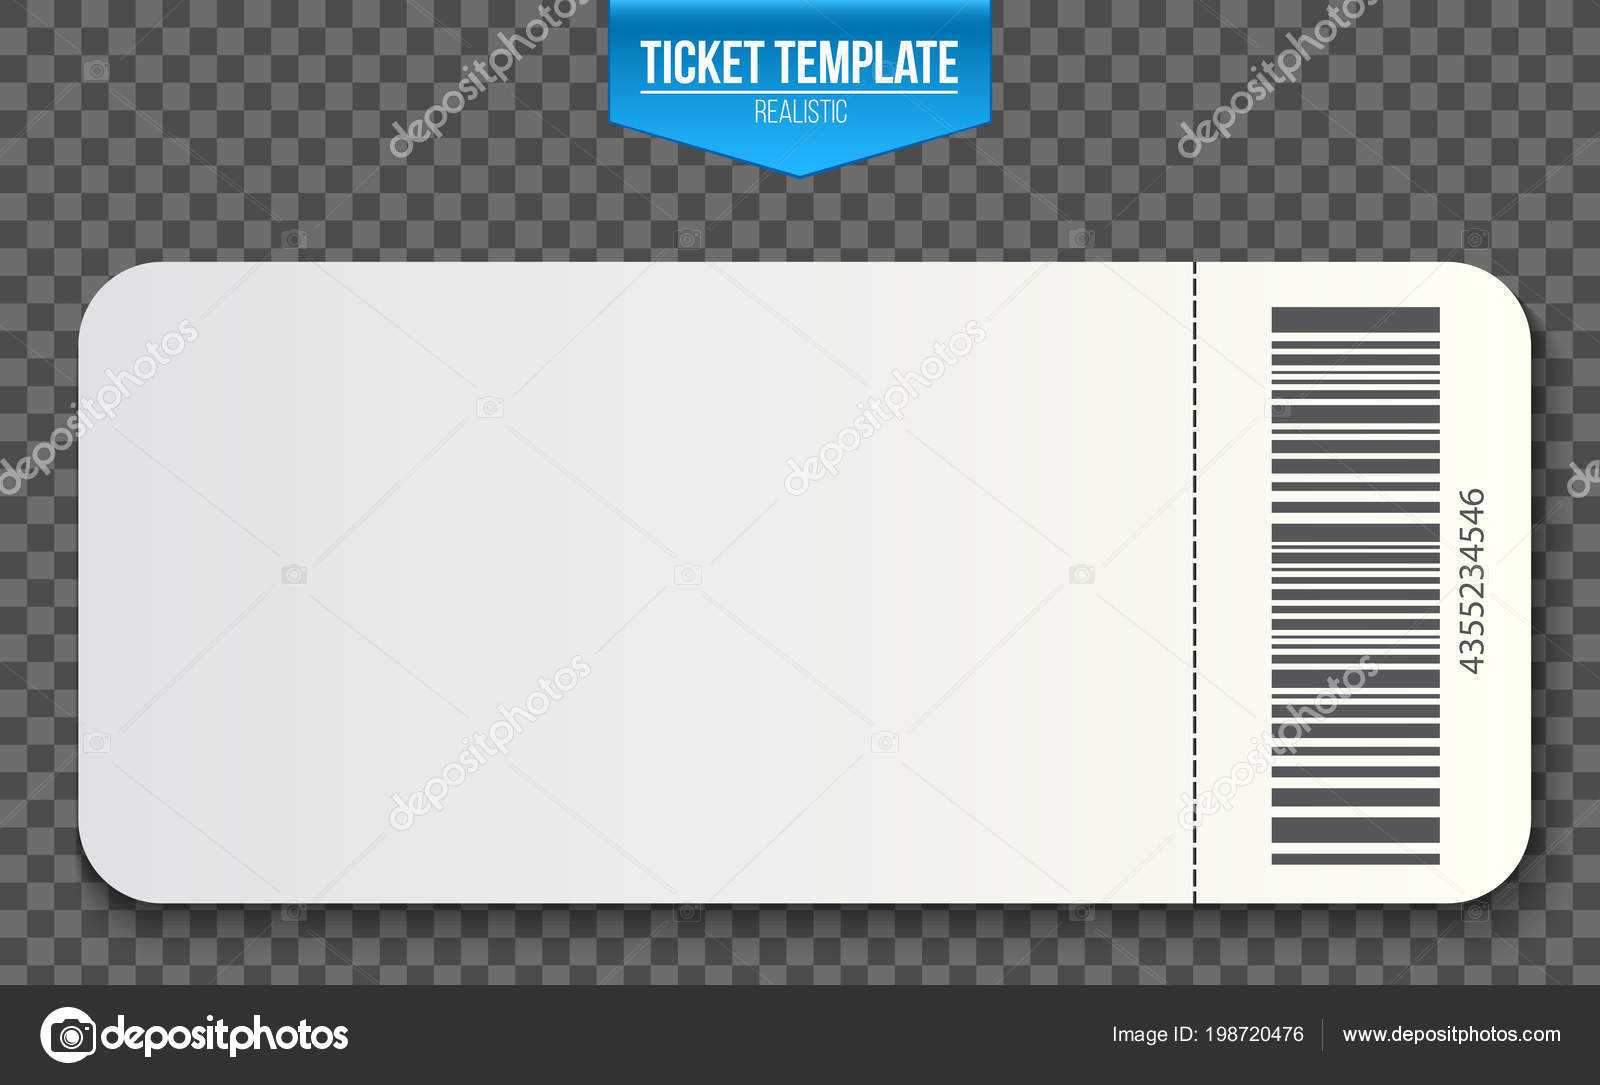 Creative Vector Illustration Of Empty Ticket Template Mockup With Blank Train Ticket Template